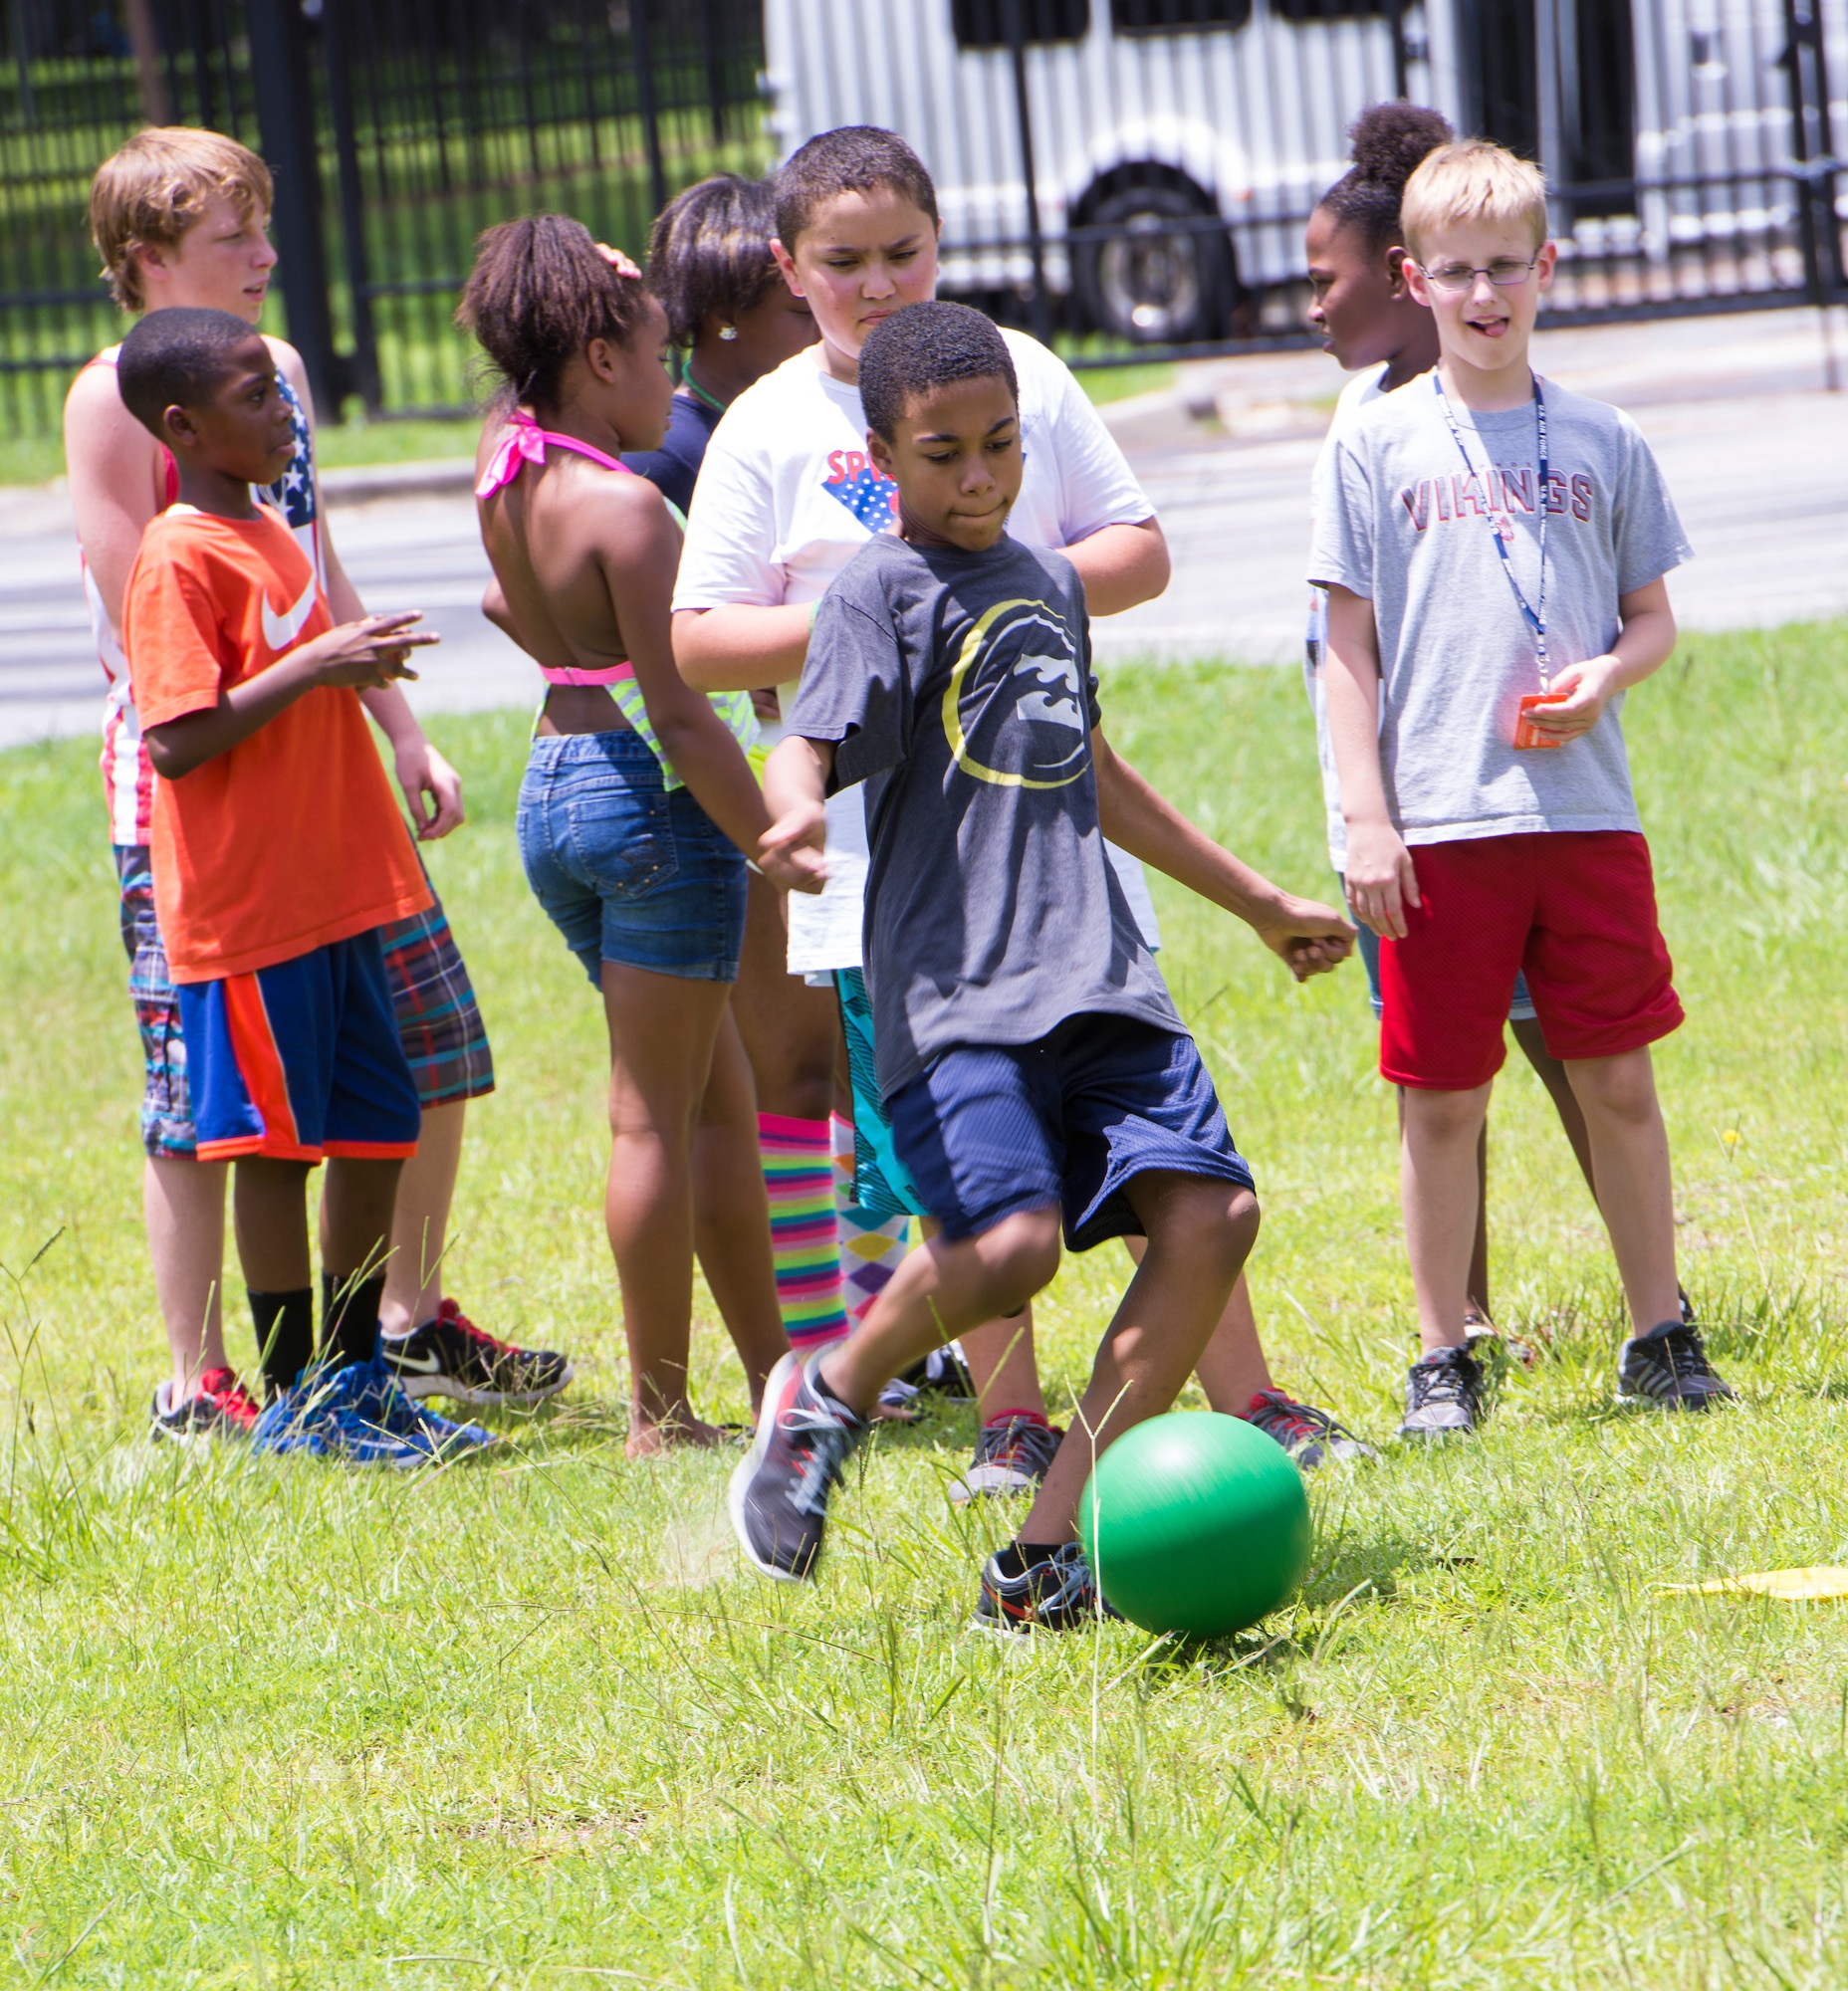 Deiondre Robinson, center, son of U.S. Air Force Master Sgt. Alton Robinson, 93d Air Ground Operations Wing, kicks the ball during a kickball game during the July Jamboree, July 6, 2015, at Moody Air Force Base, Ga. Approximately 50 kids participated in this year’s event. (U.S. Air Force photo by Airman Greg Nash/Released)